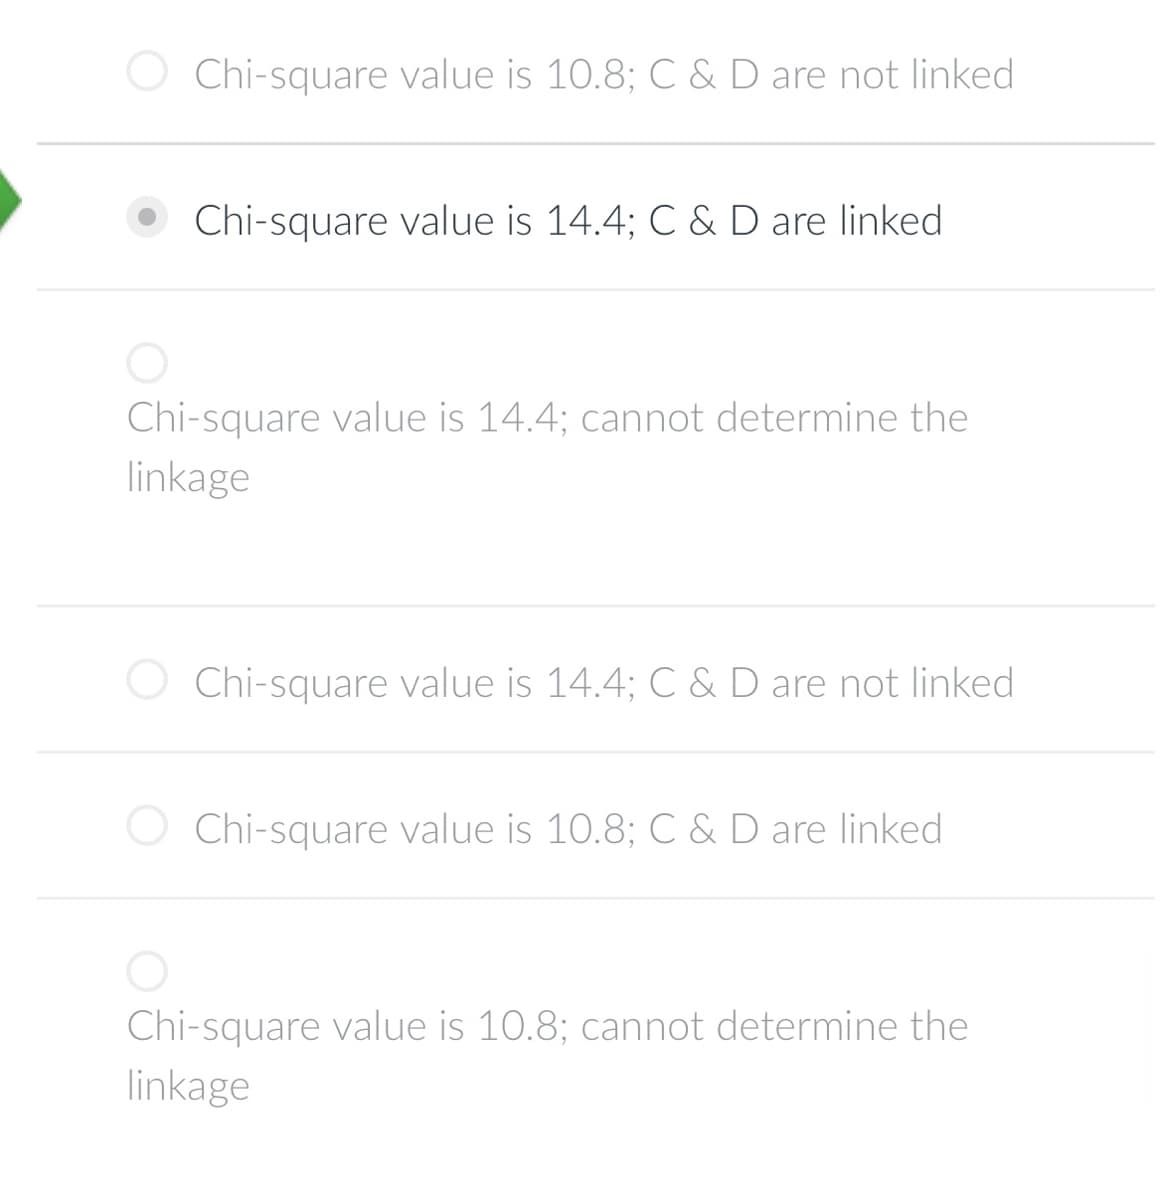 Chi-square value is 10.8; C & D are not linked
Chi-square value is 14.4; C & D are linked.
Chi-square value is 14.4; cannot determine the
linkage
Chi-square value is 14.4; C & D are not linked
Chi-square value is 10.8; C & D are linked
Chi-square value is 10.8; cannot determine the
linkage